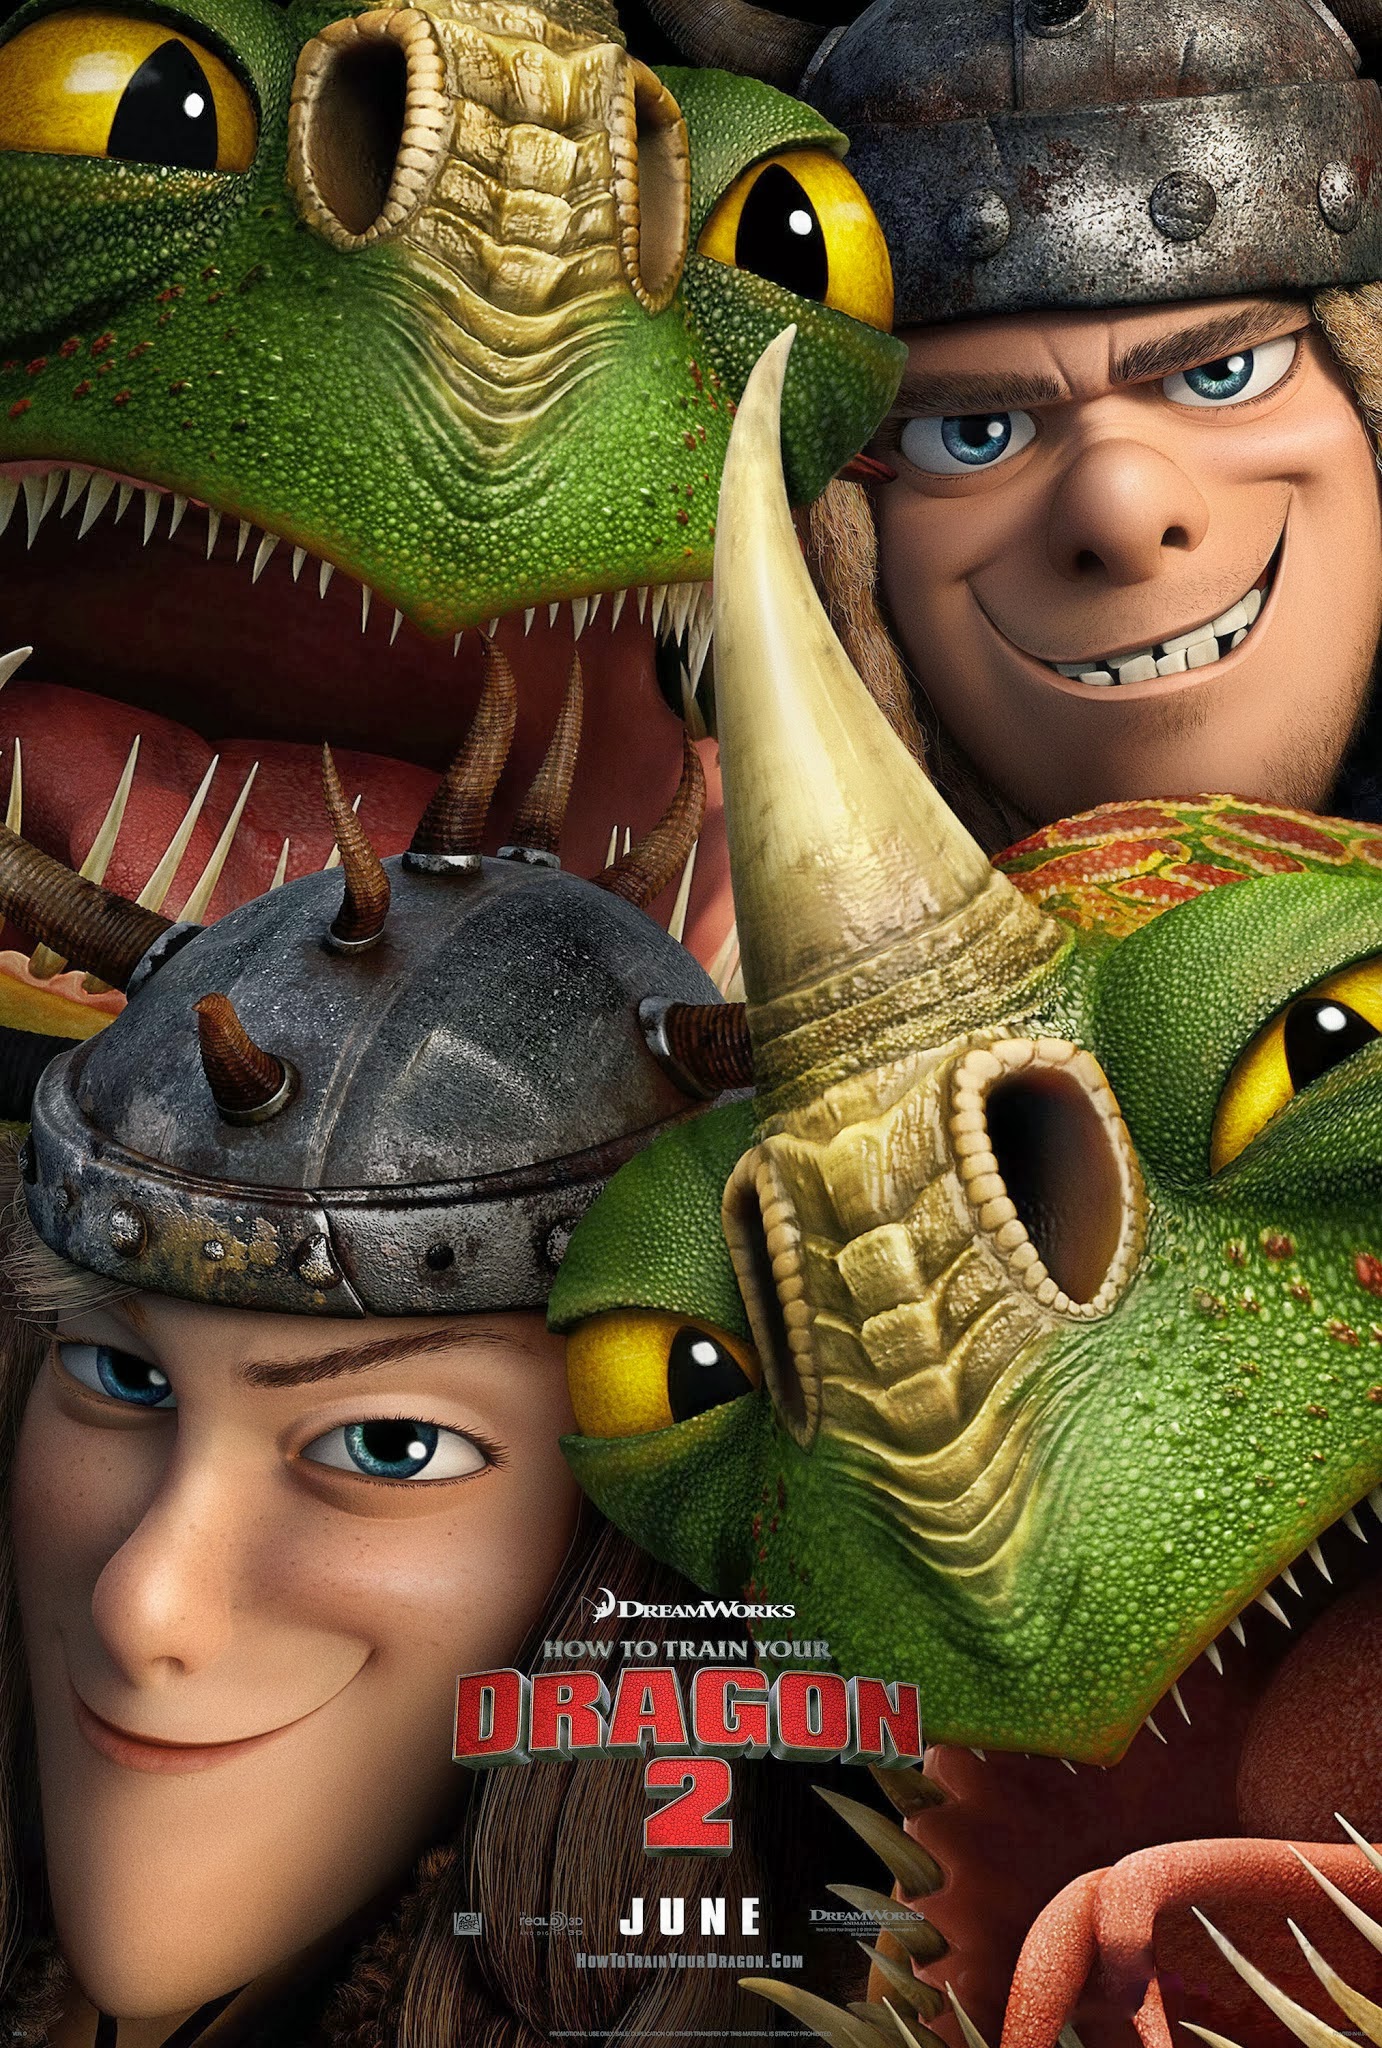 How To Train Your Dragon Image How To Train Your Dragon 36552494 1382 2048 